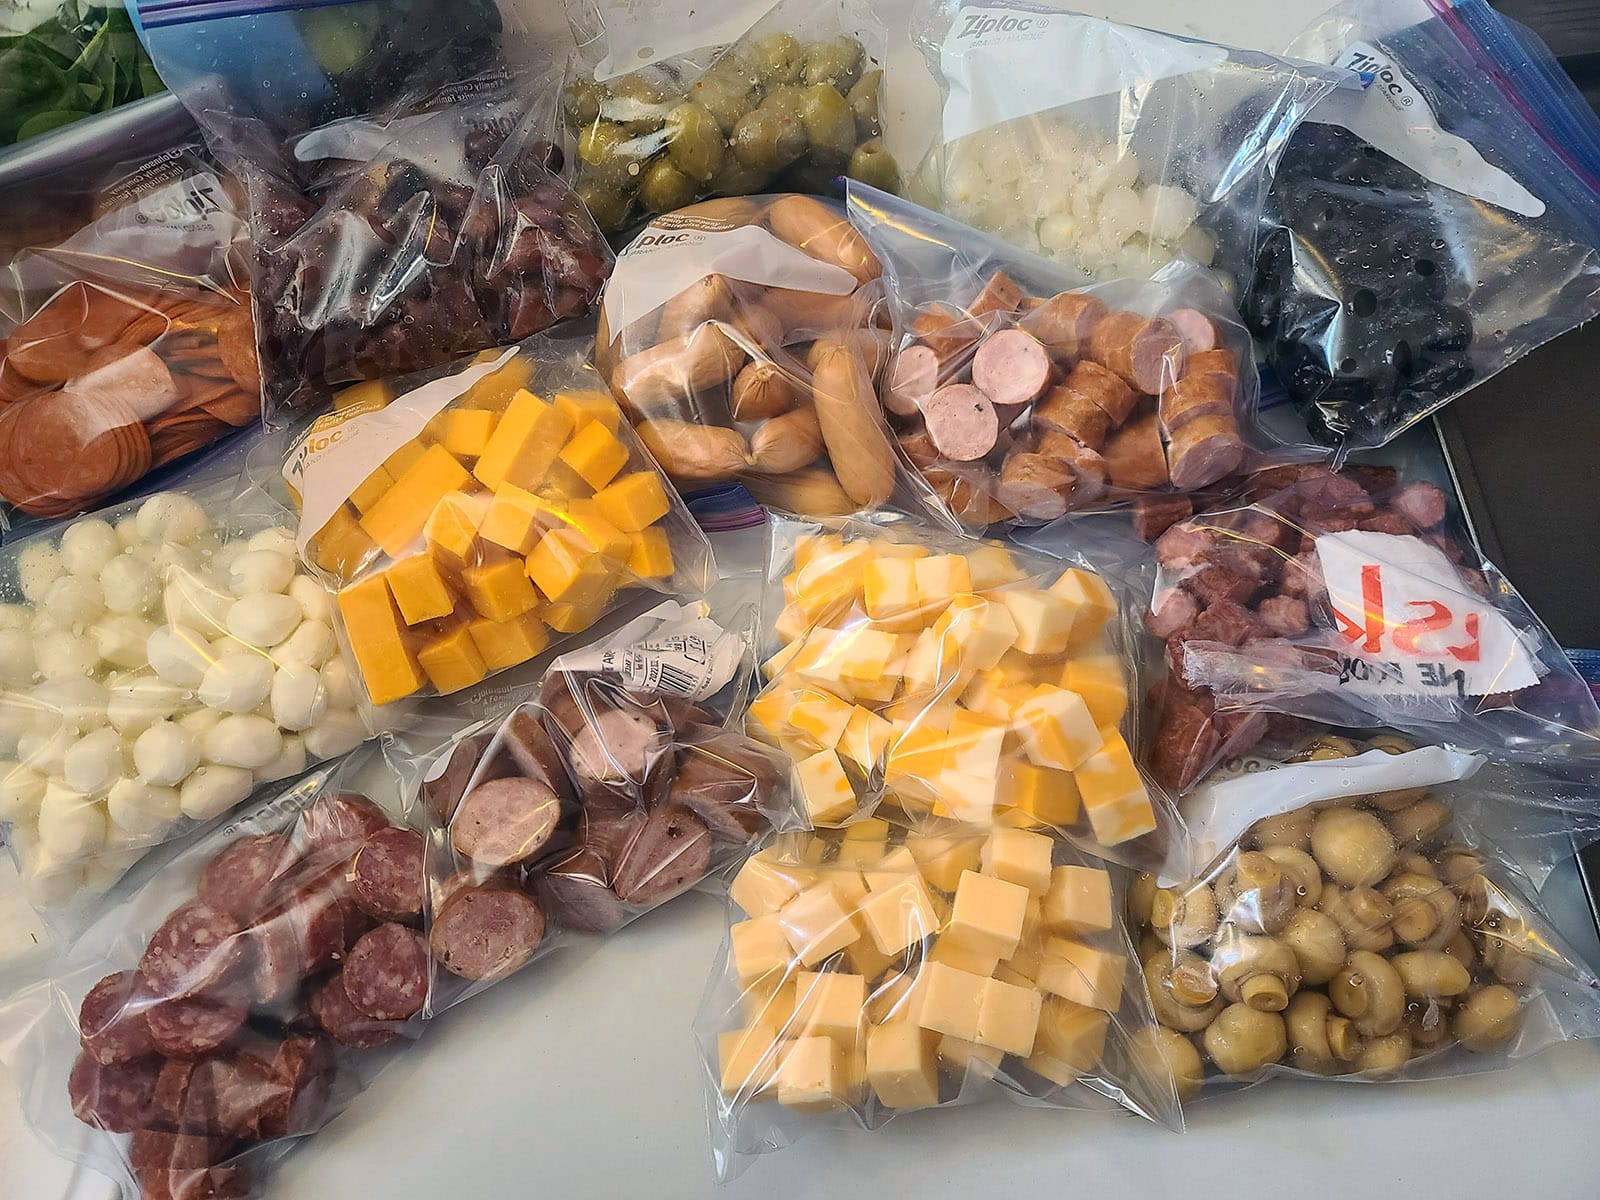 Several bags of cheeses, meats, and olives in a pile.